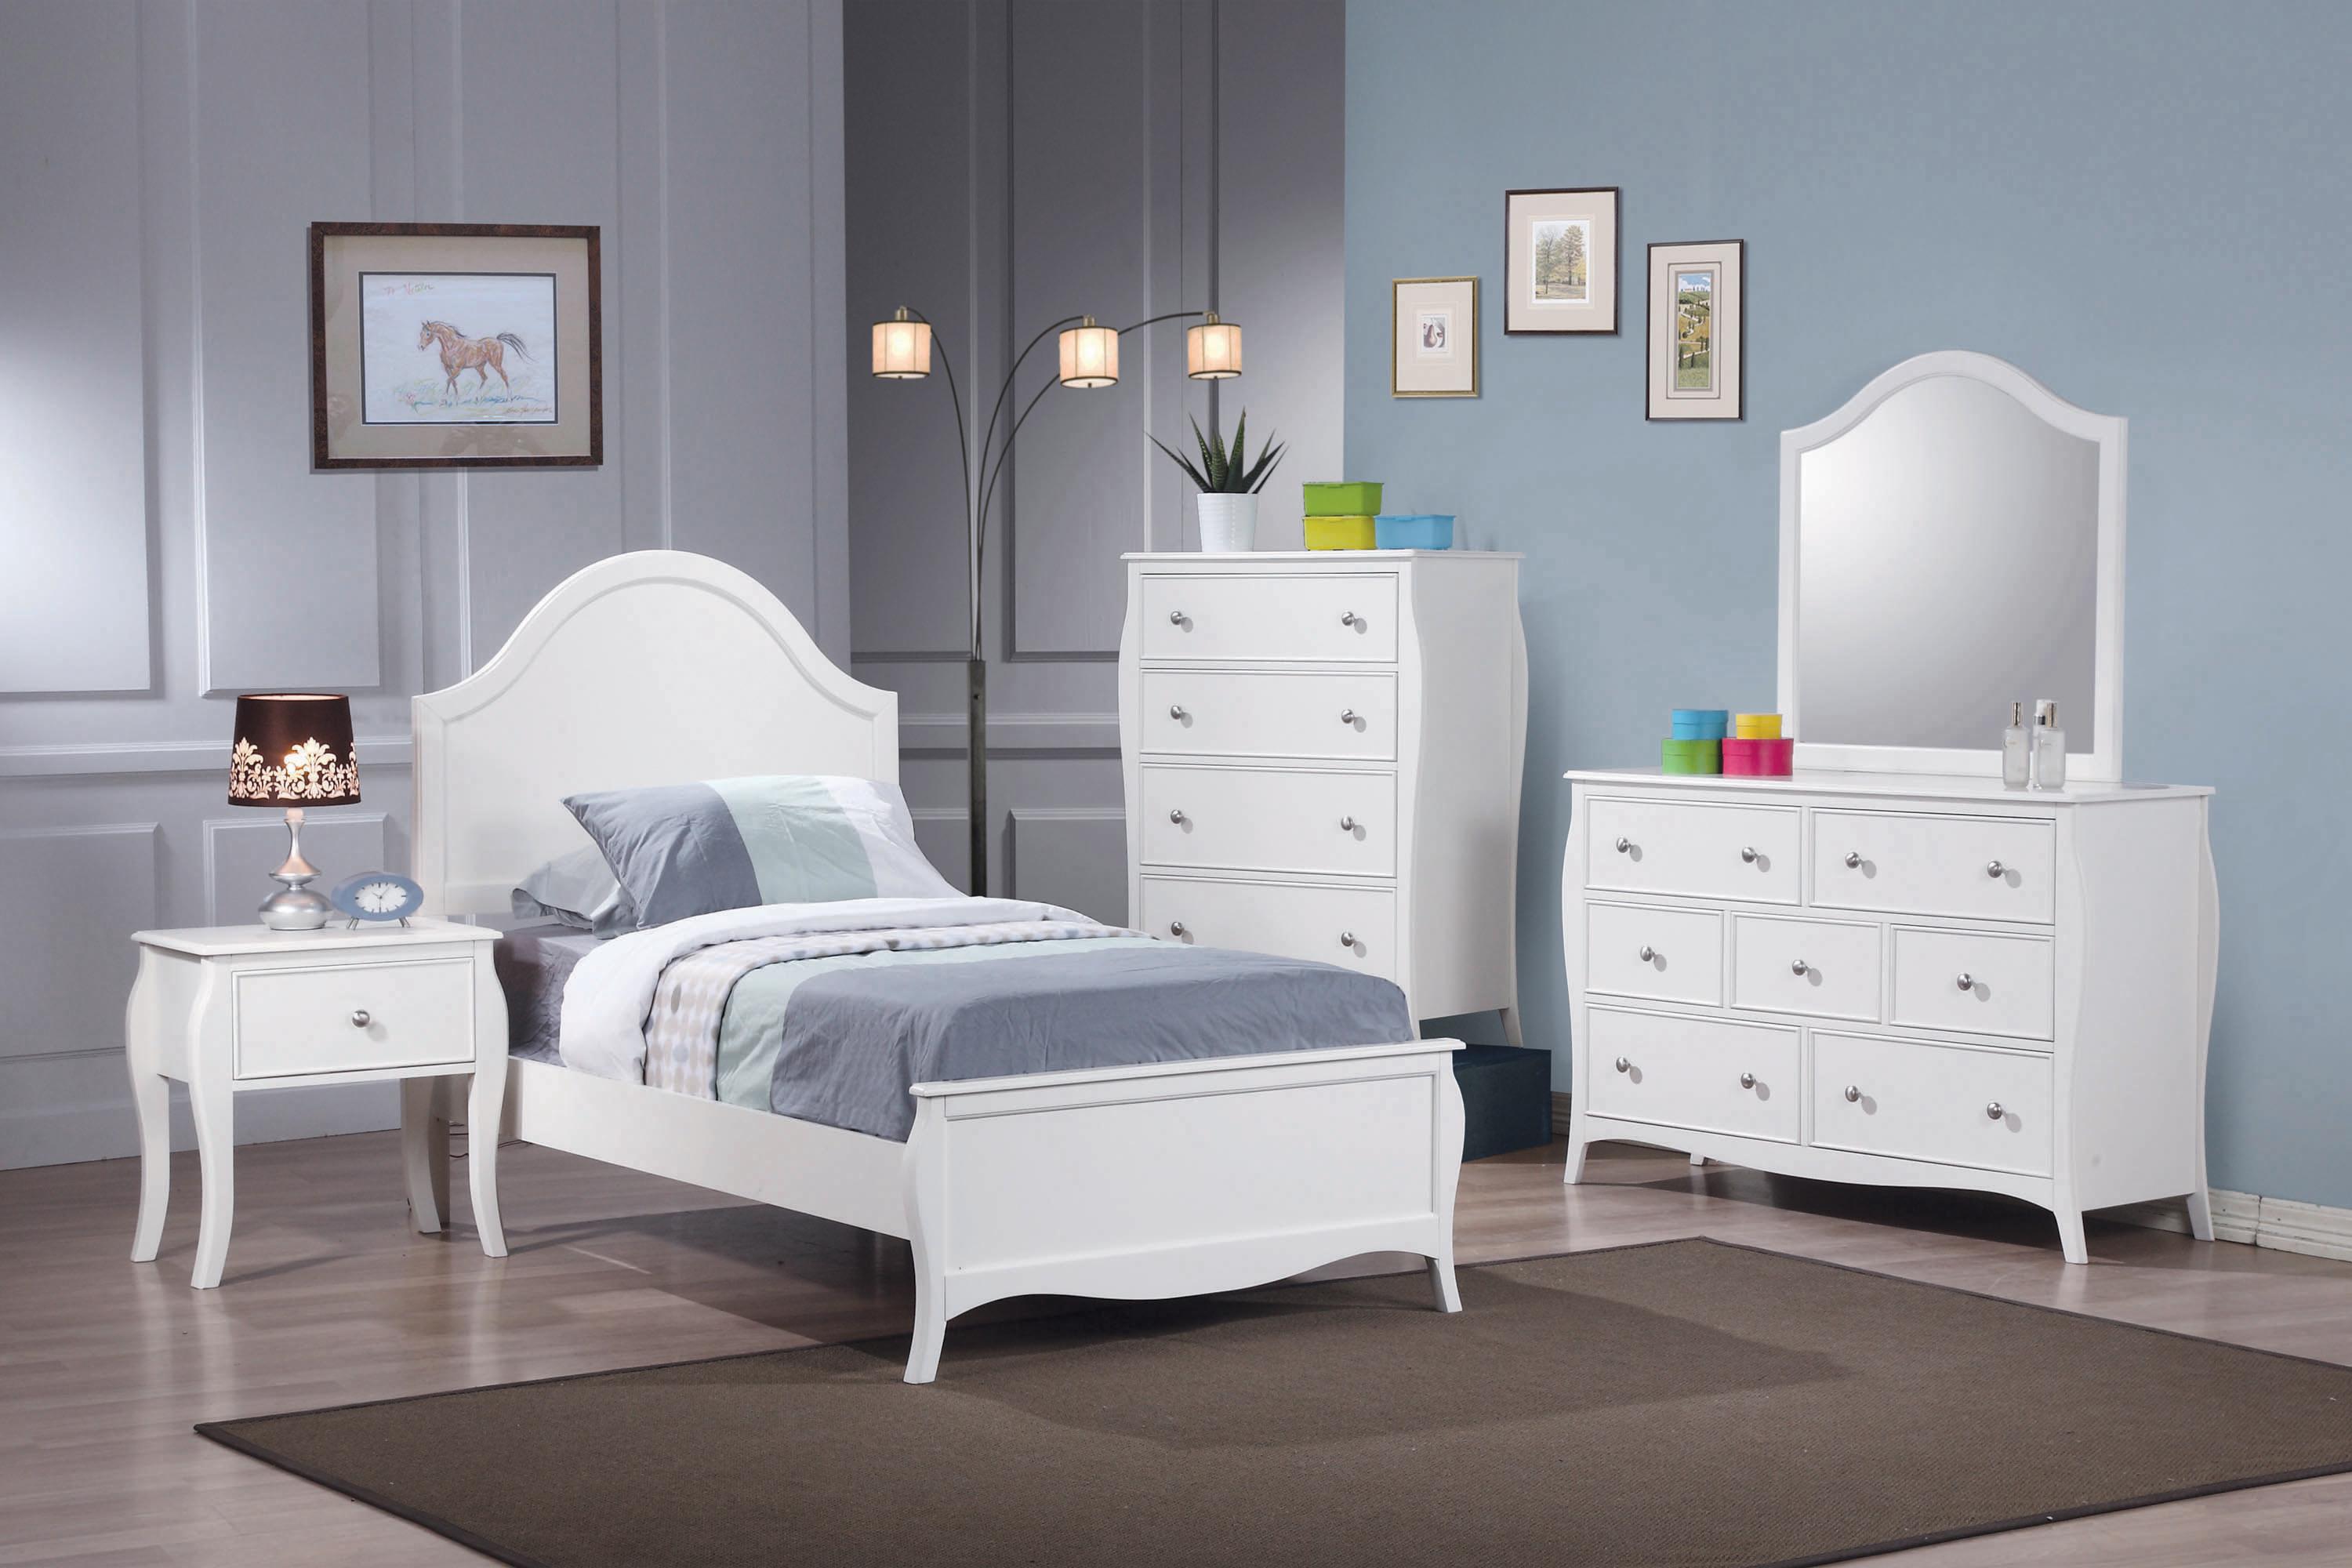 Traditional Bedroom Set 400561F-3PC Dominique 400561F-3PC in White 